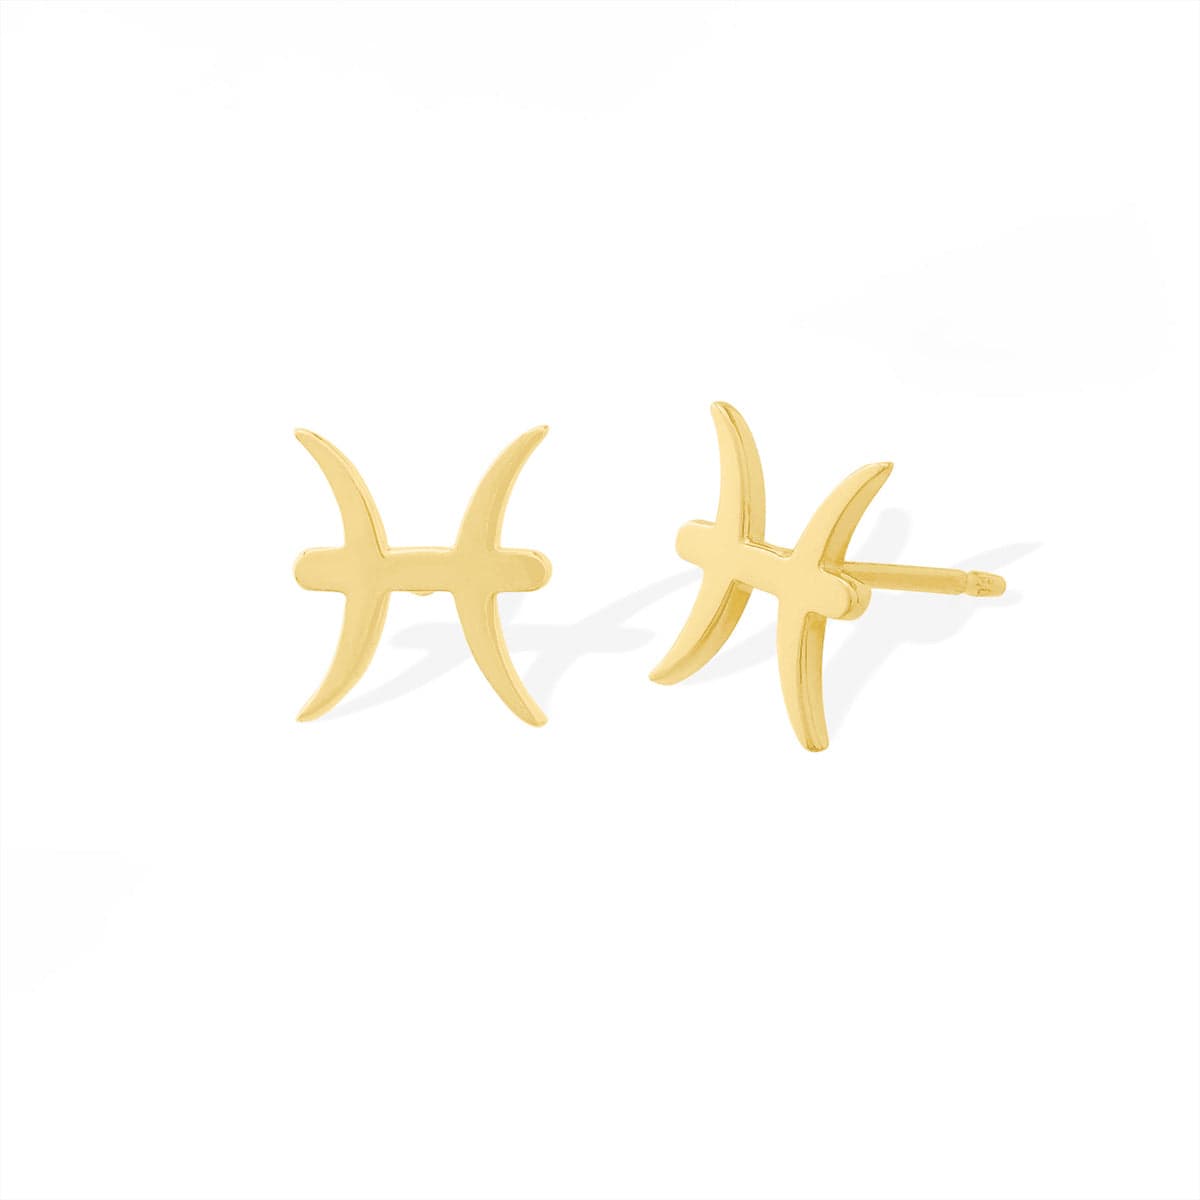 Boma Jewelry Earrings 14K Gold Plated / Pisces Zodiac Studs